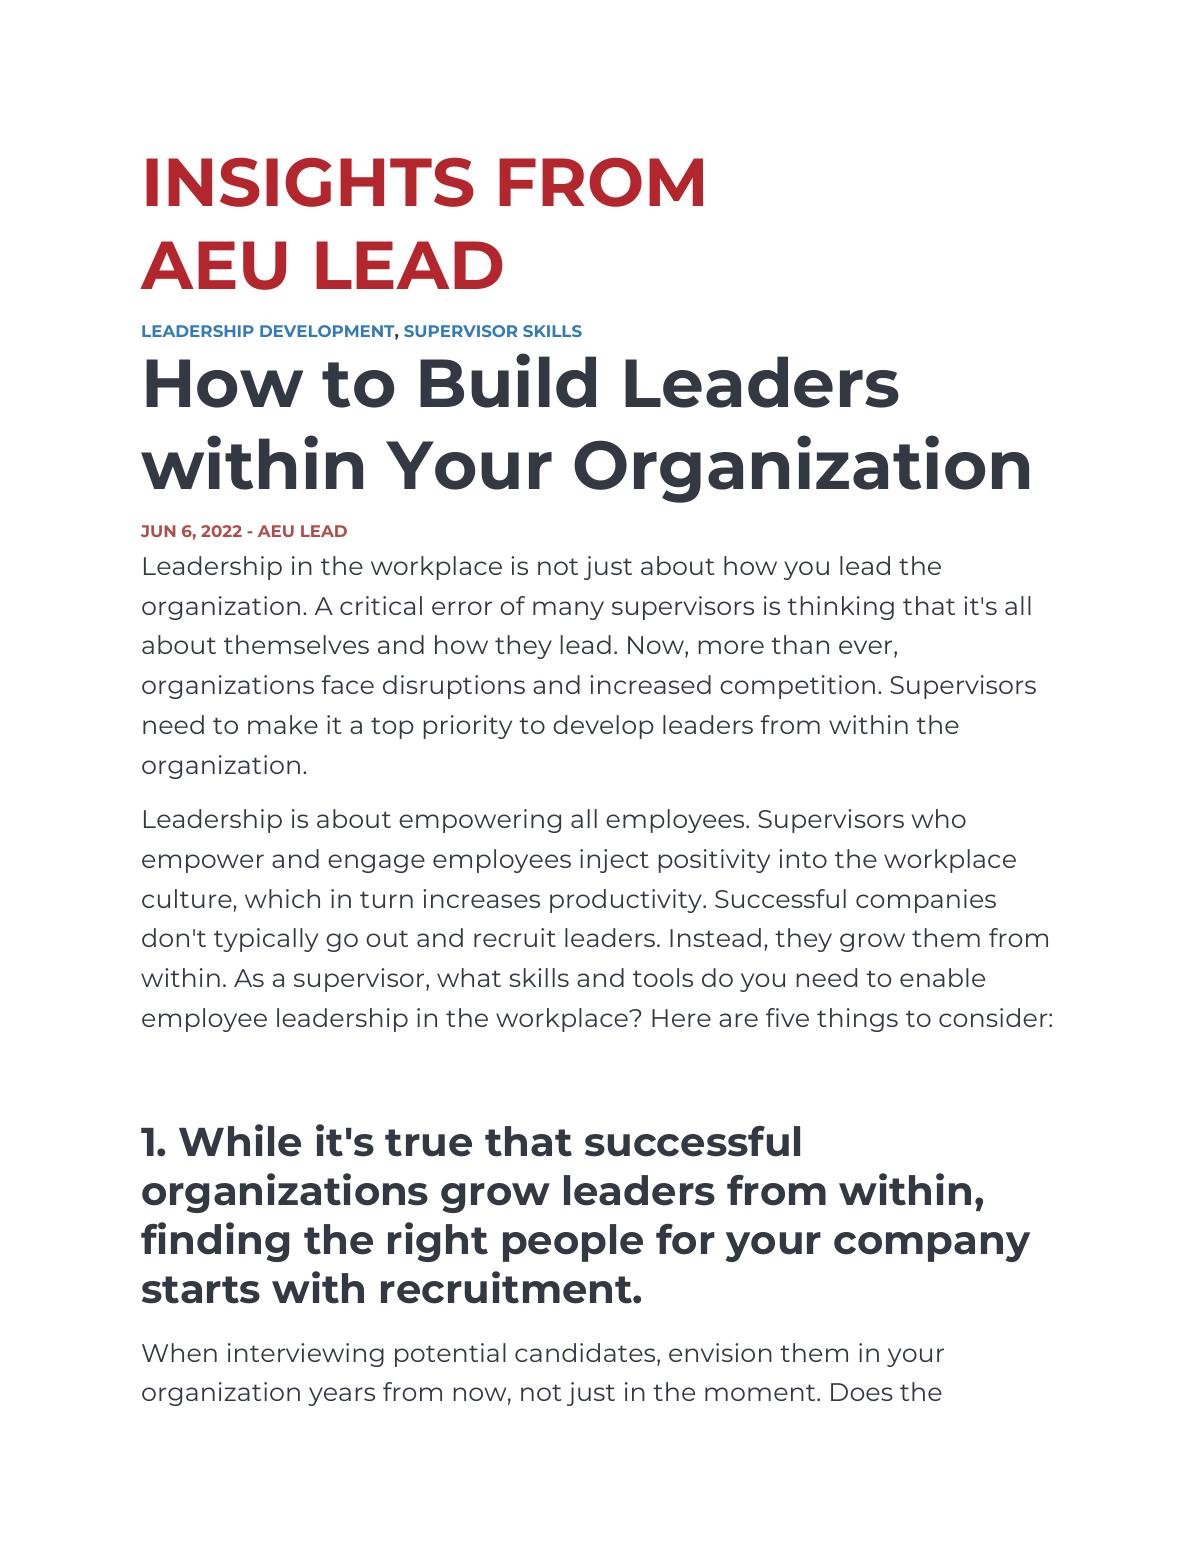 How to Build Leaders within Your Organization